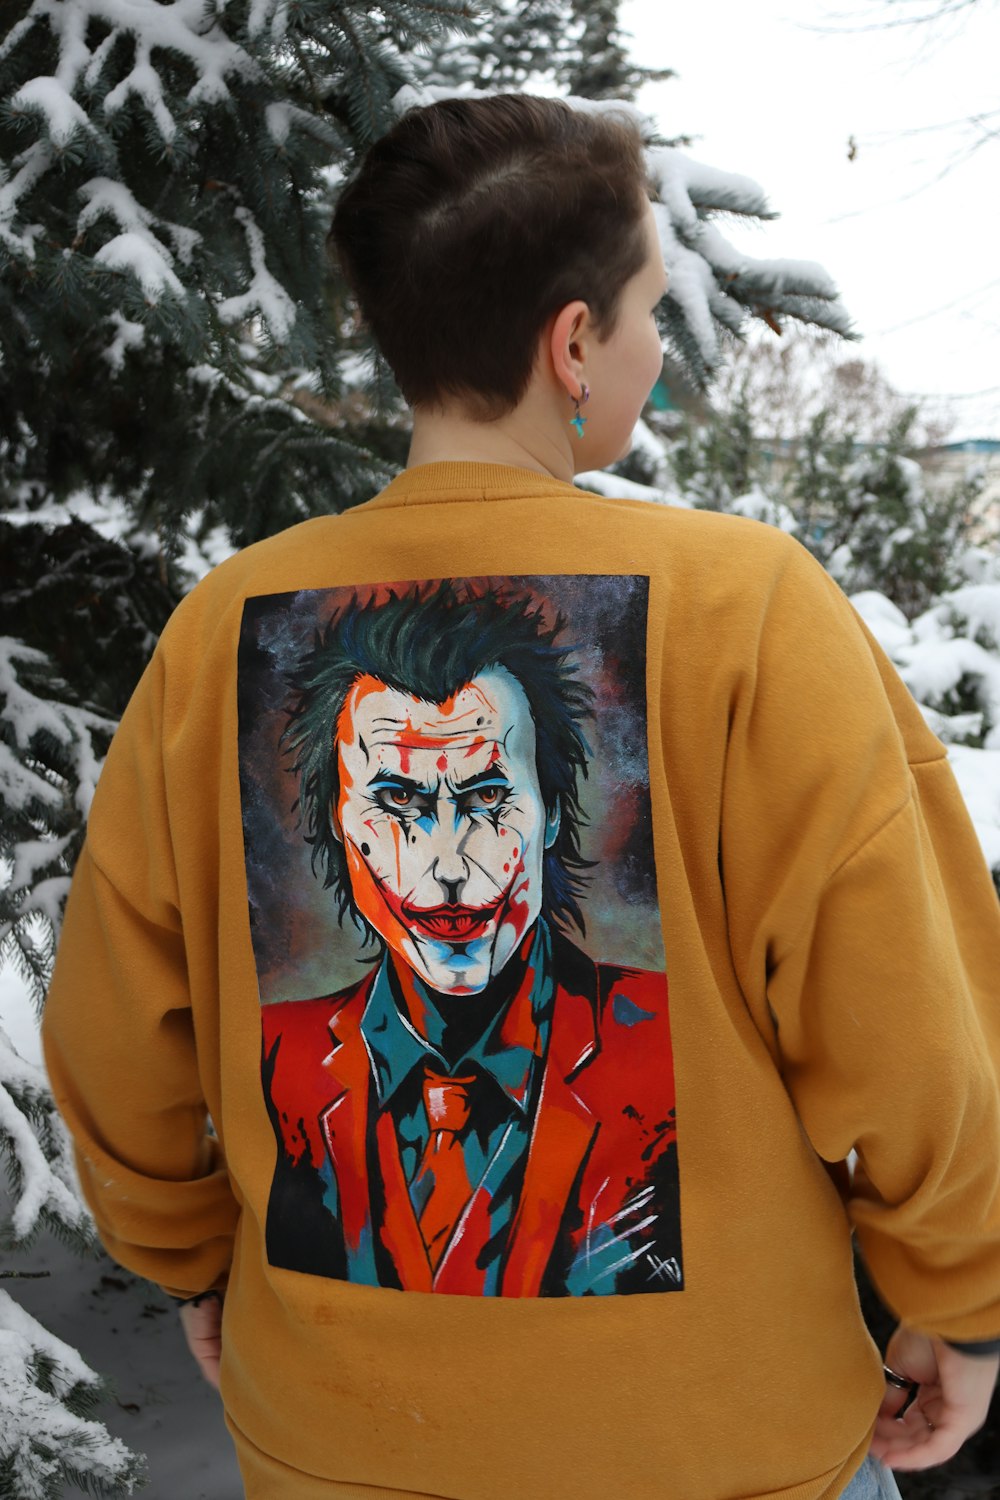 a young boy wearing a sweatshirt with a painting of a joker on it